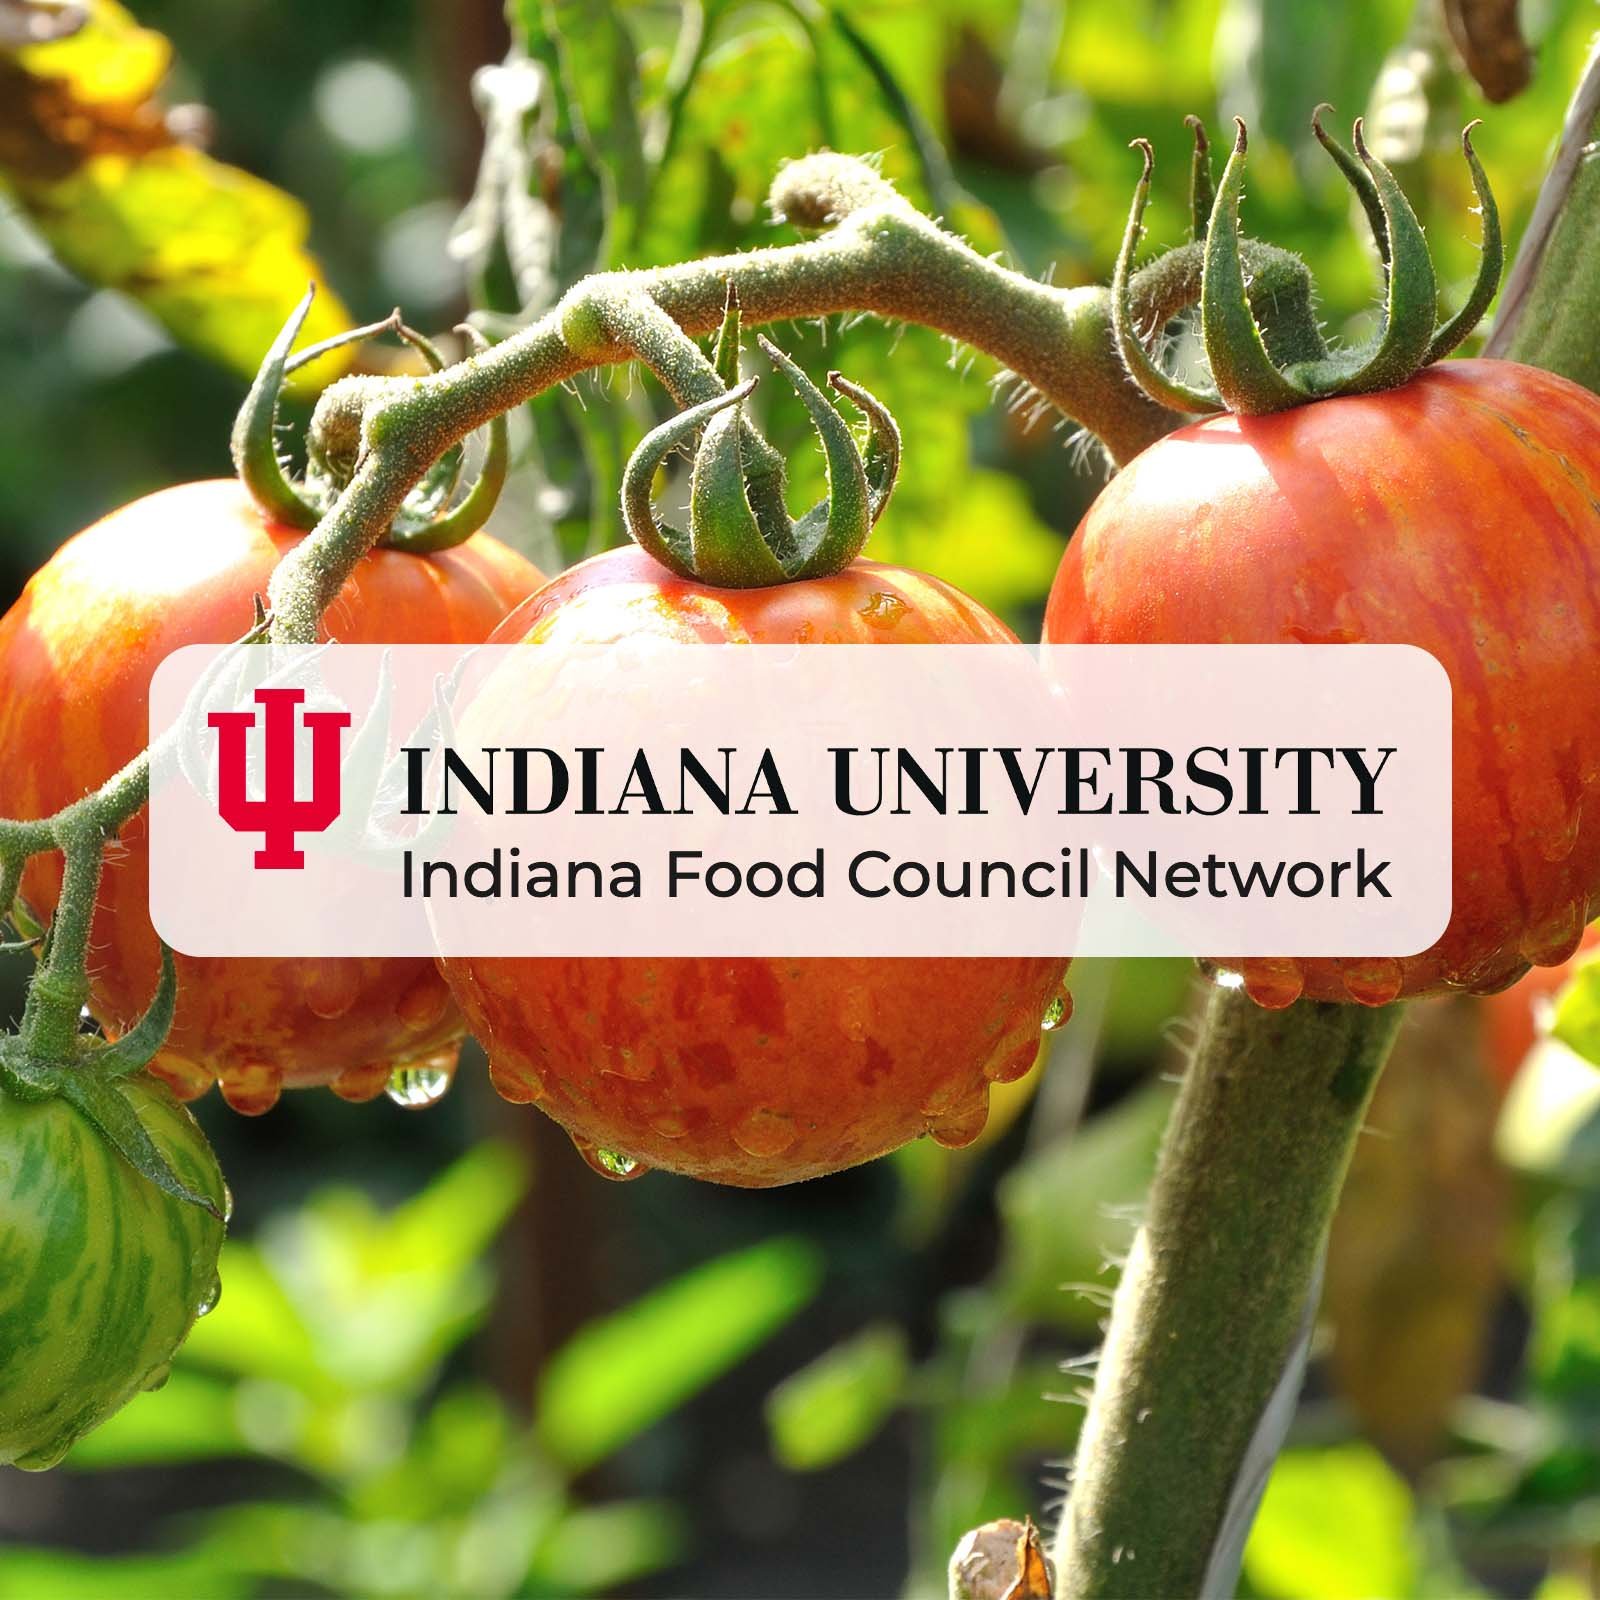 Indiana University Food Council Network